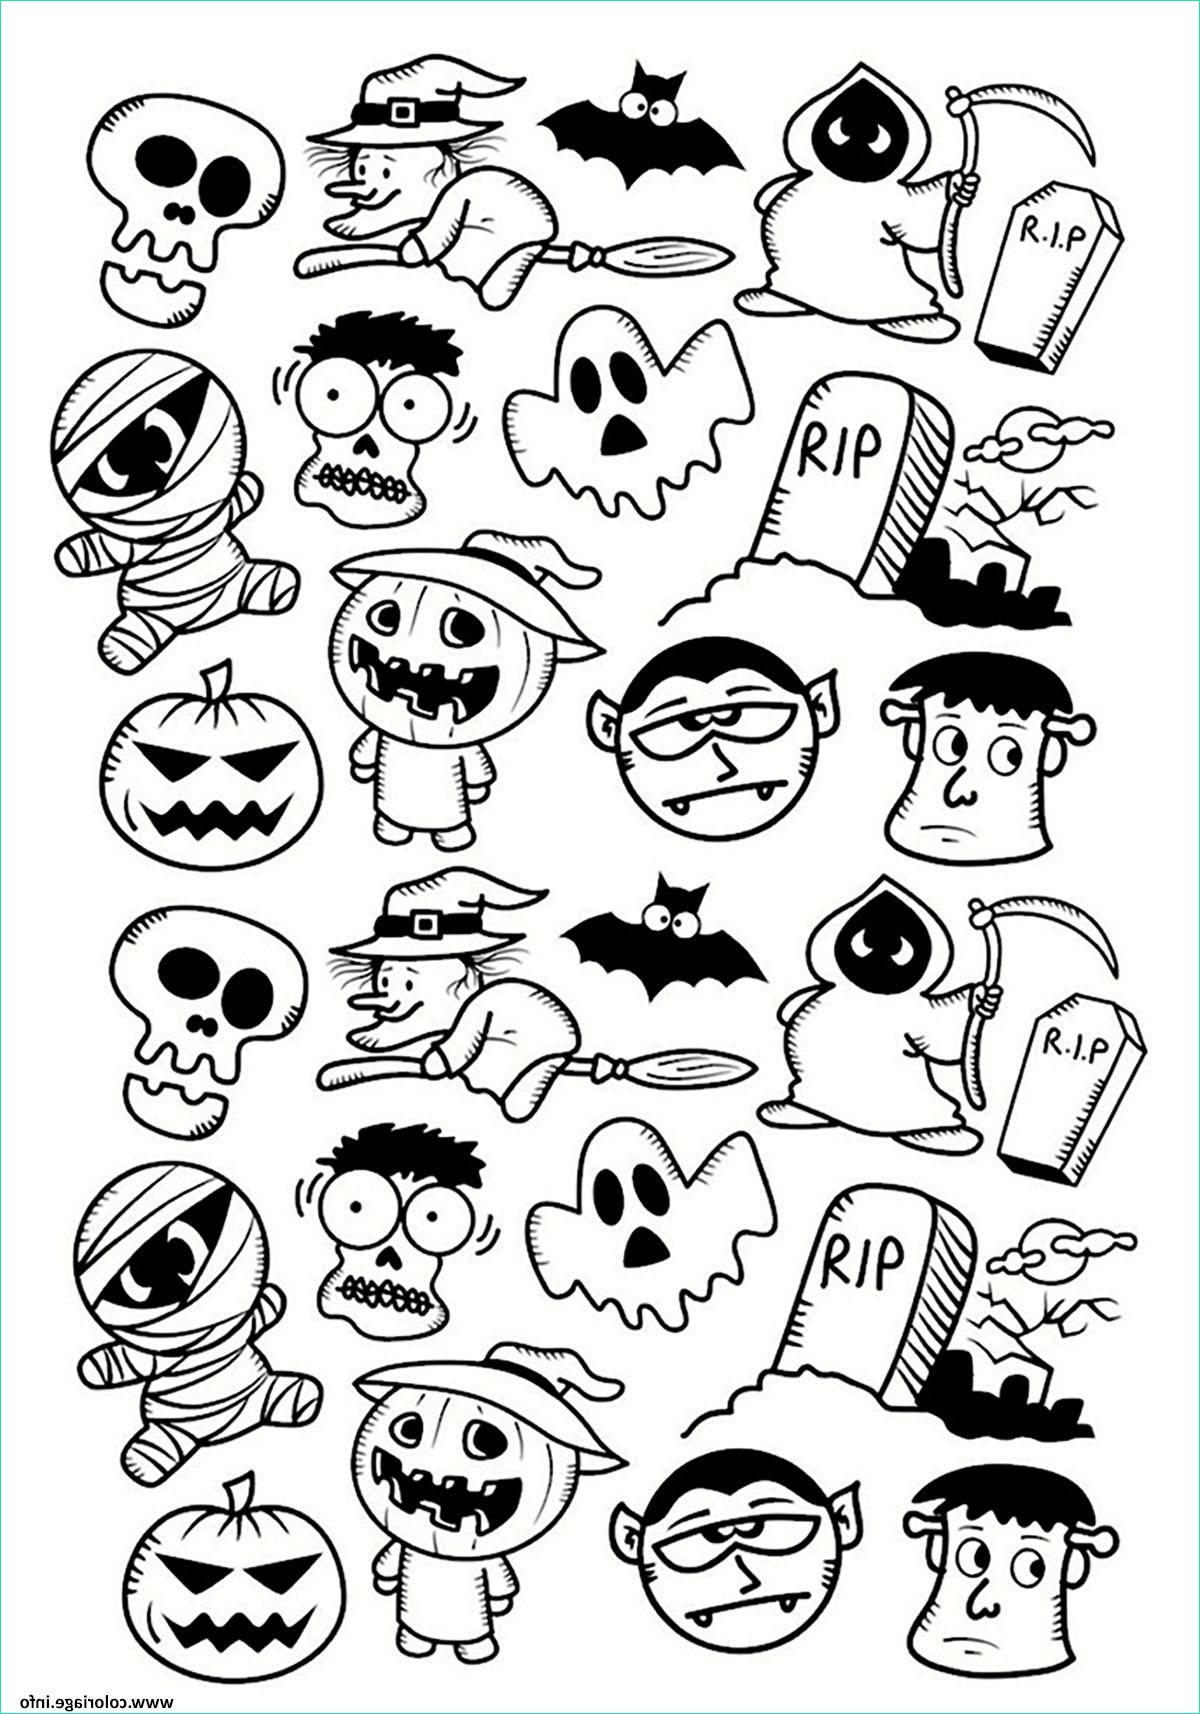 halloween personnages doodle coloriage dessin